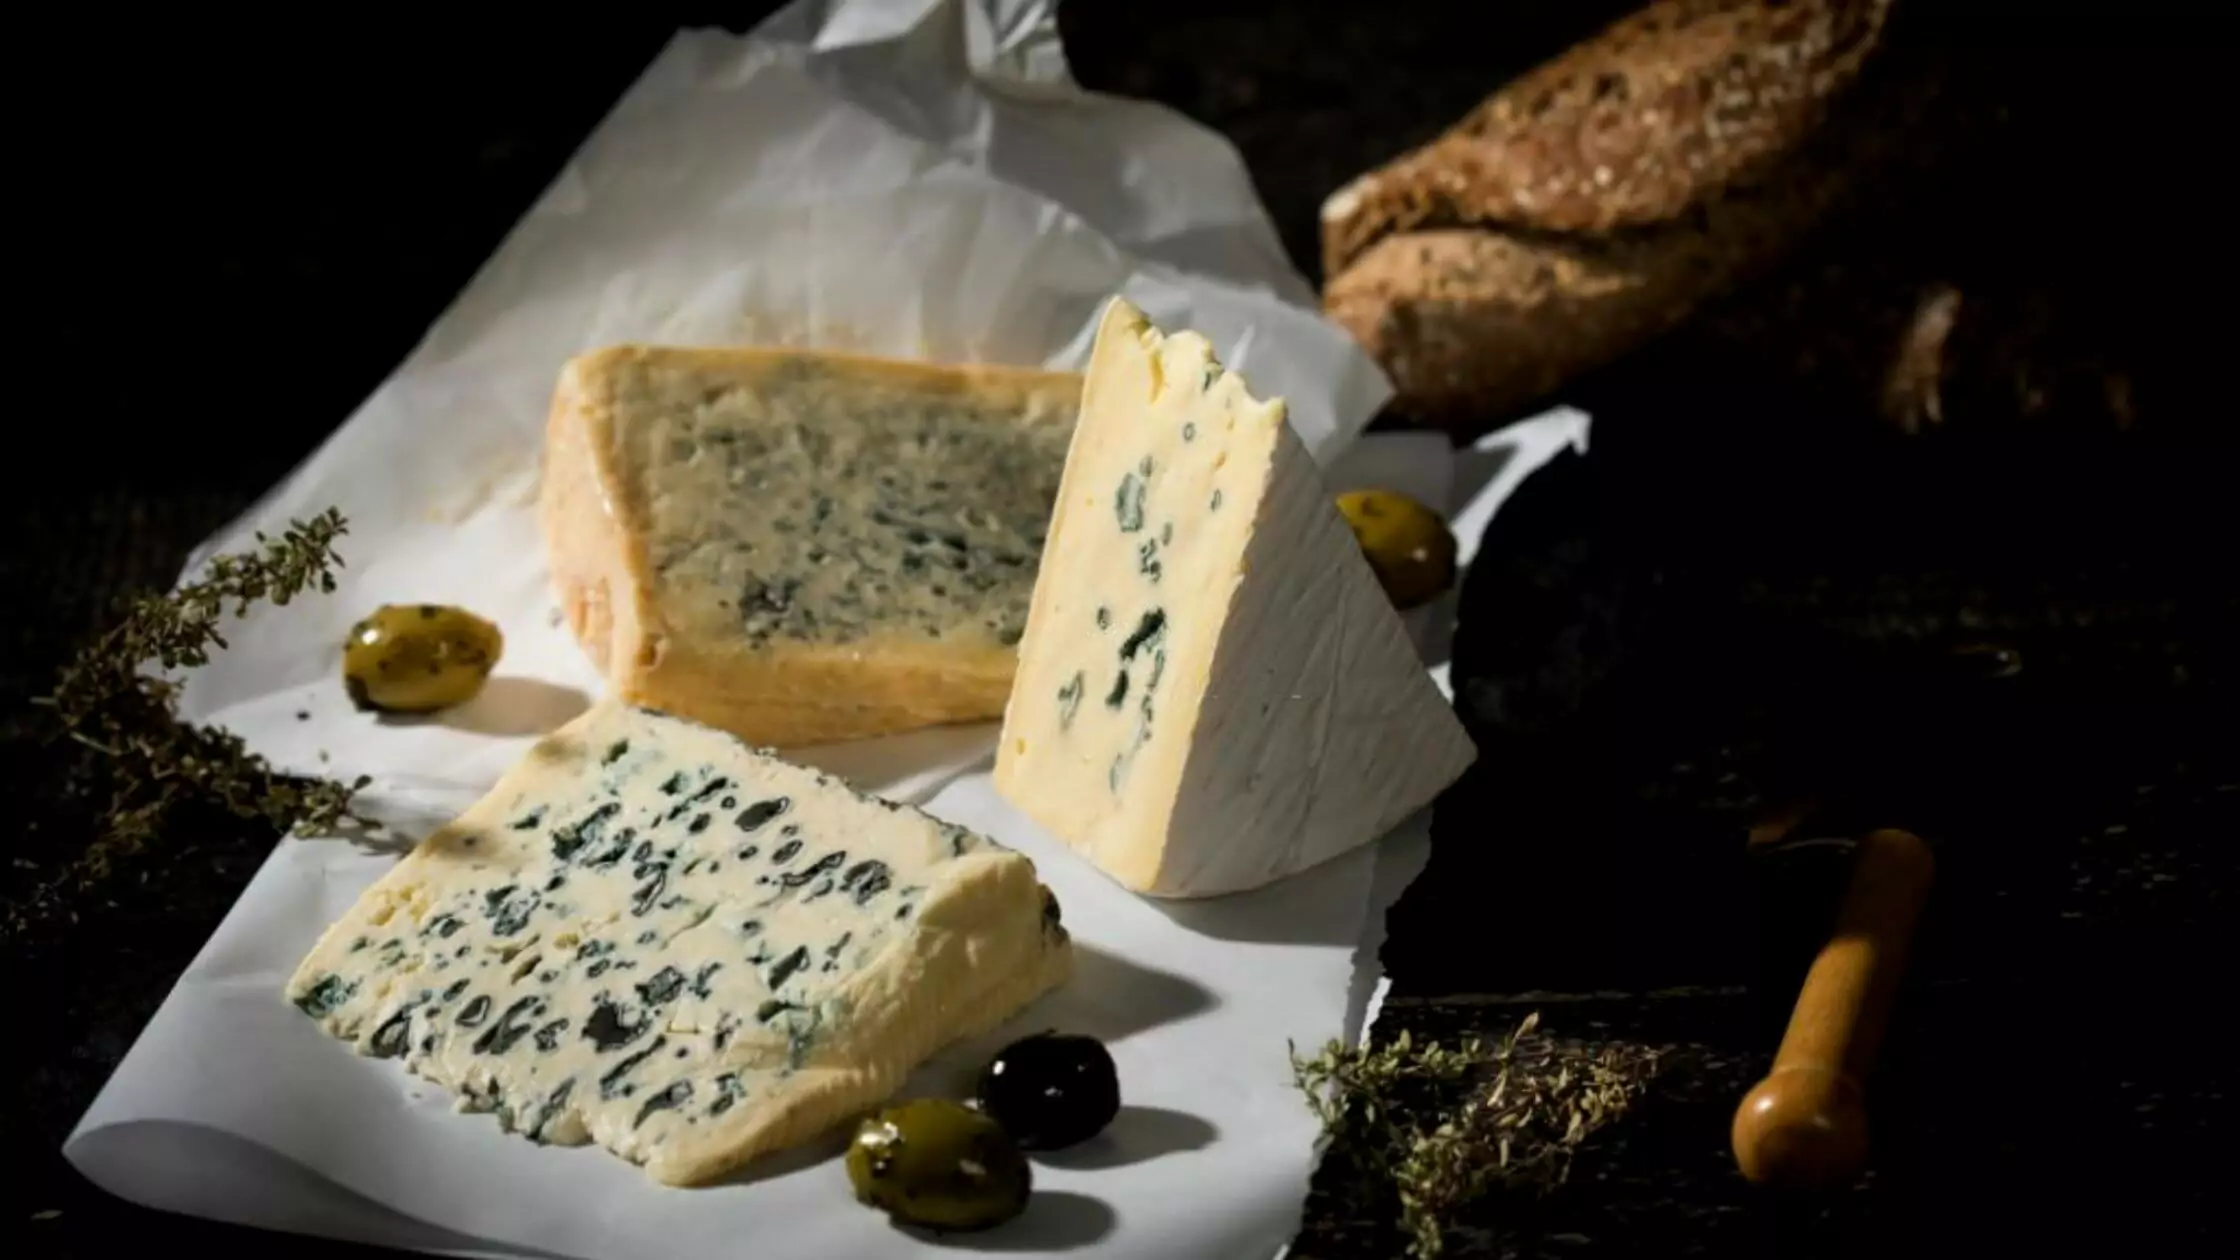 Blue Cheese And Its Contribution To Improving Health